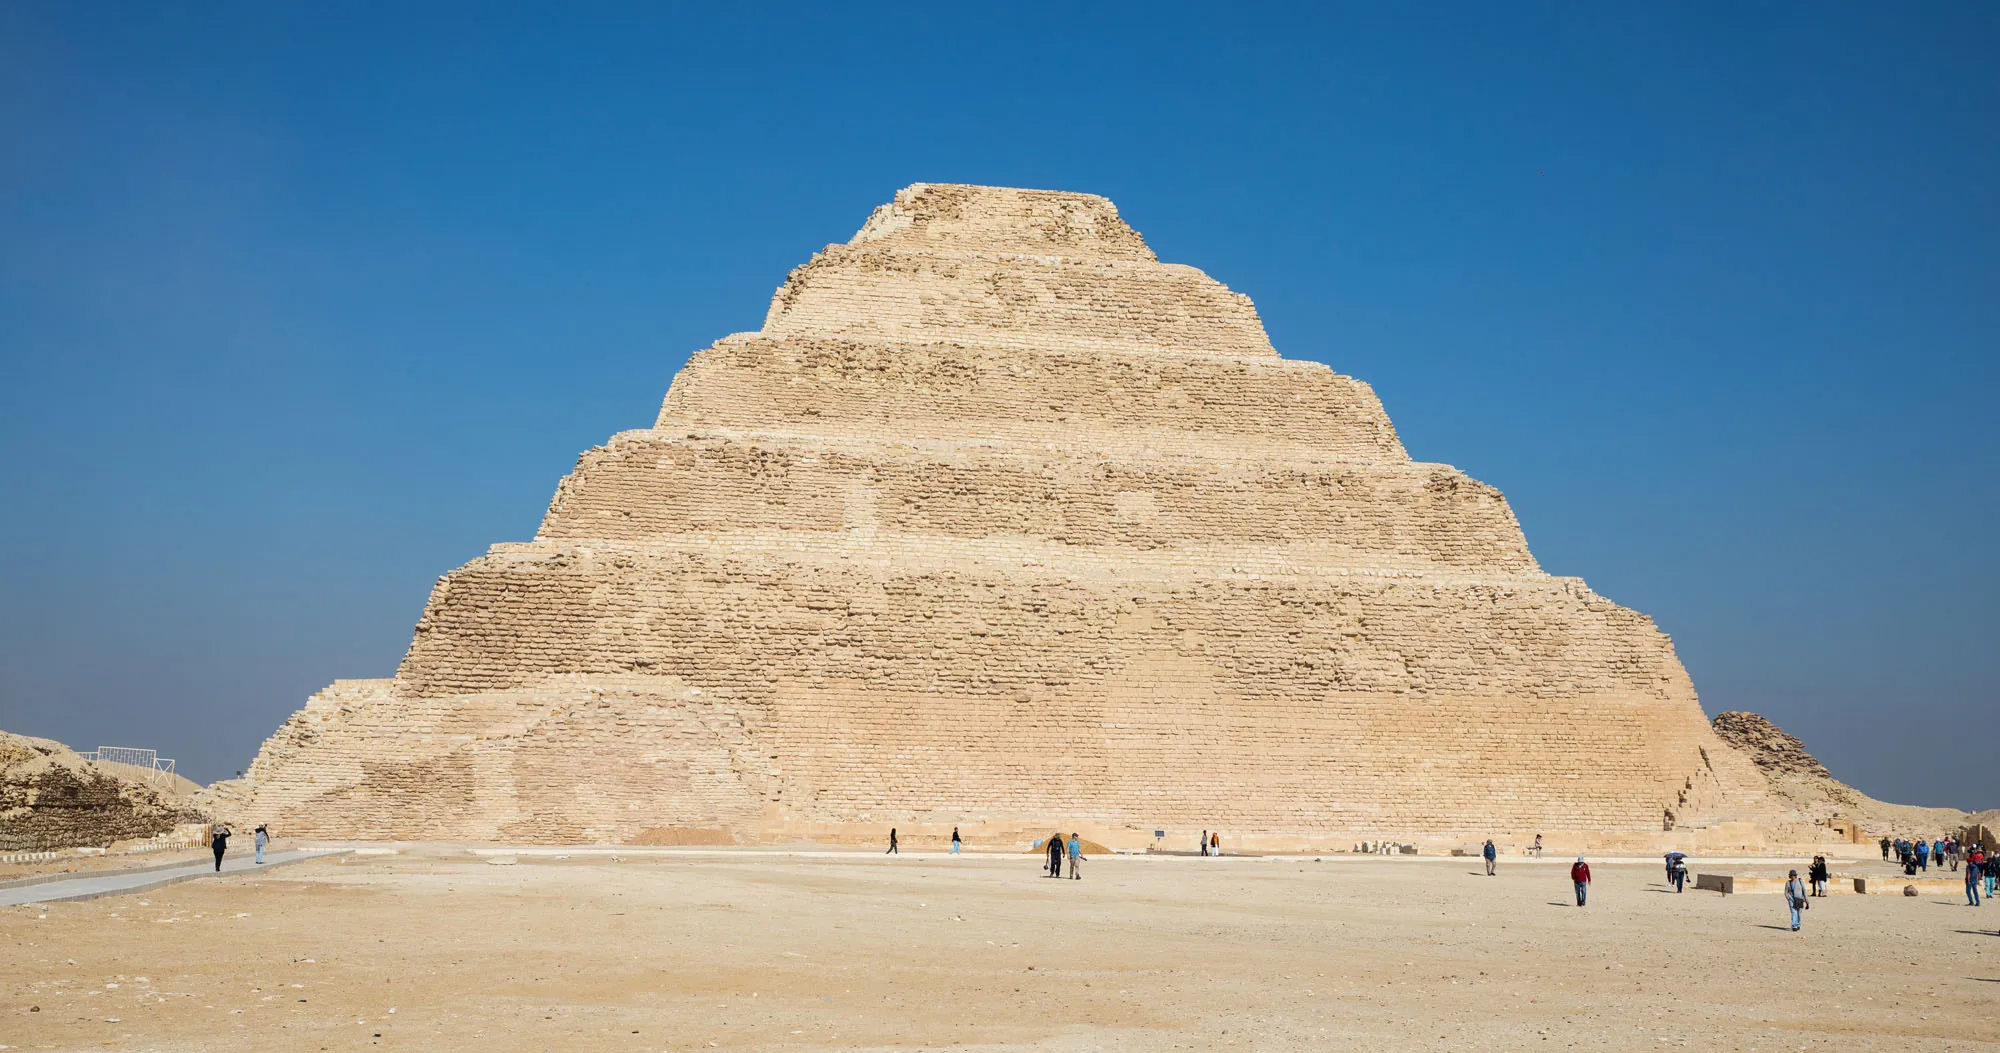 Featured image for “Dahshur, Memphis and Saqqara Day Trip from Cairo”